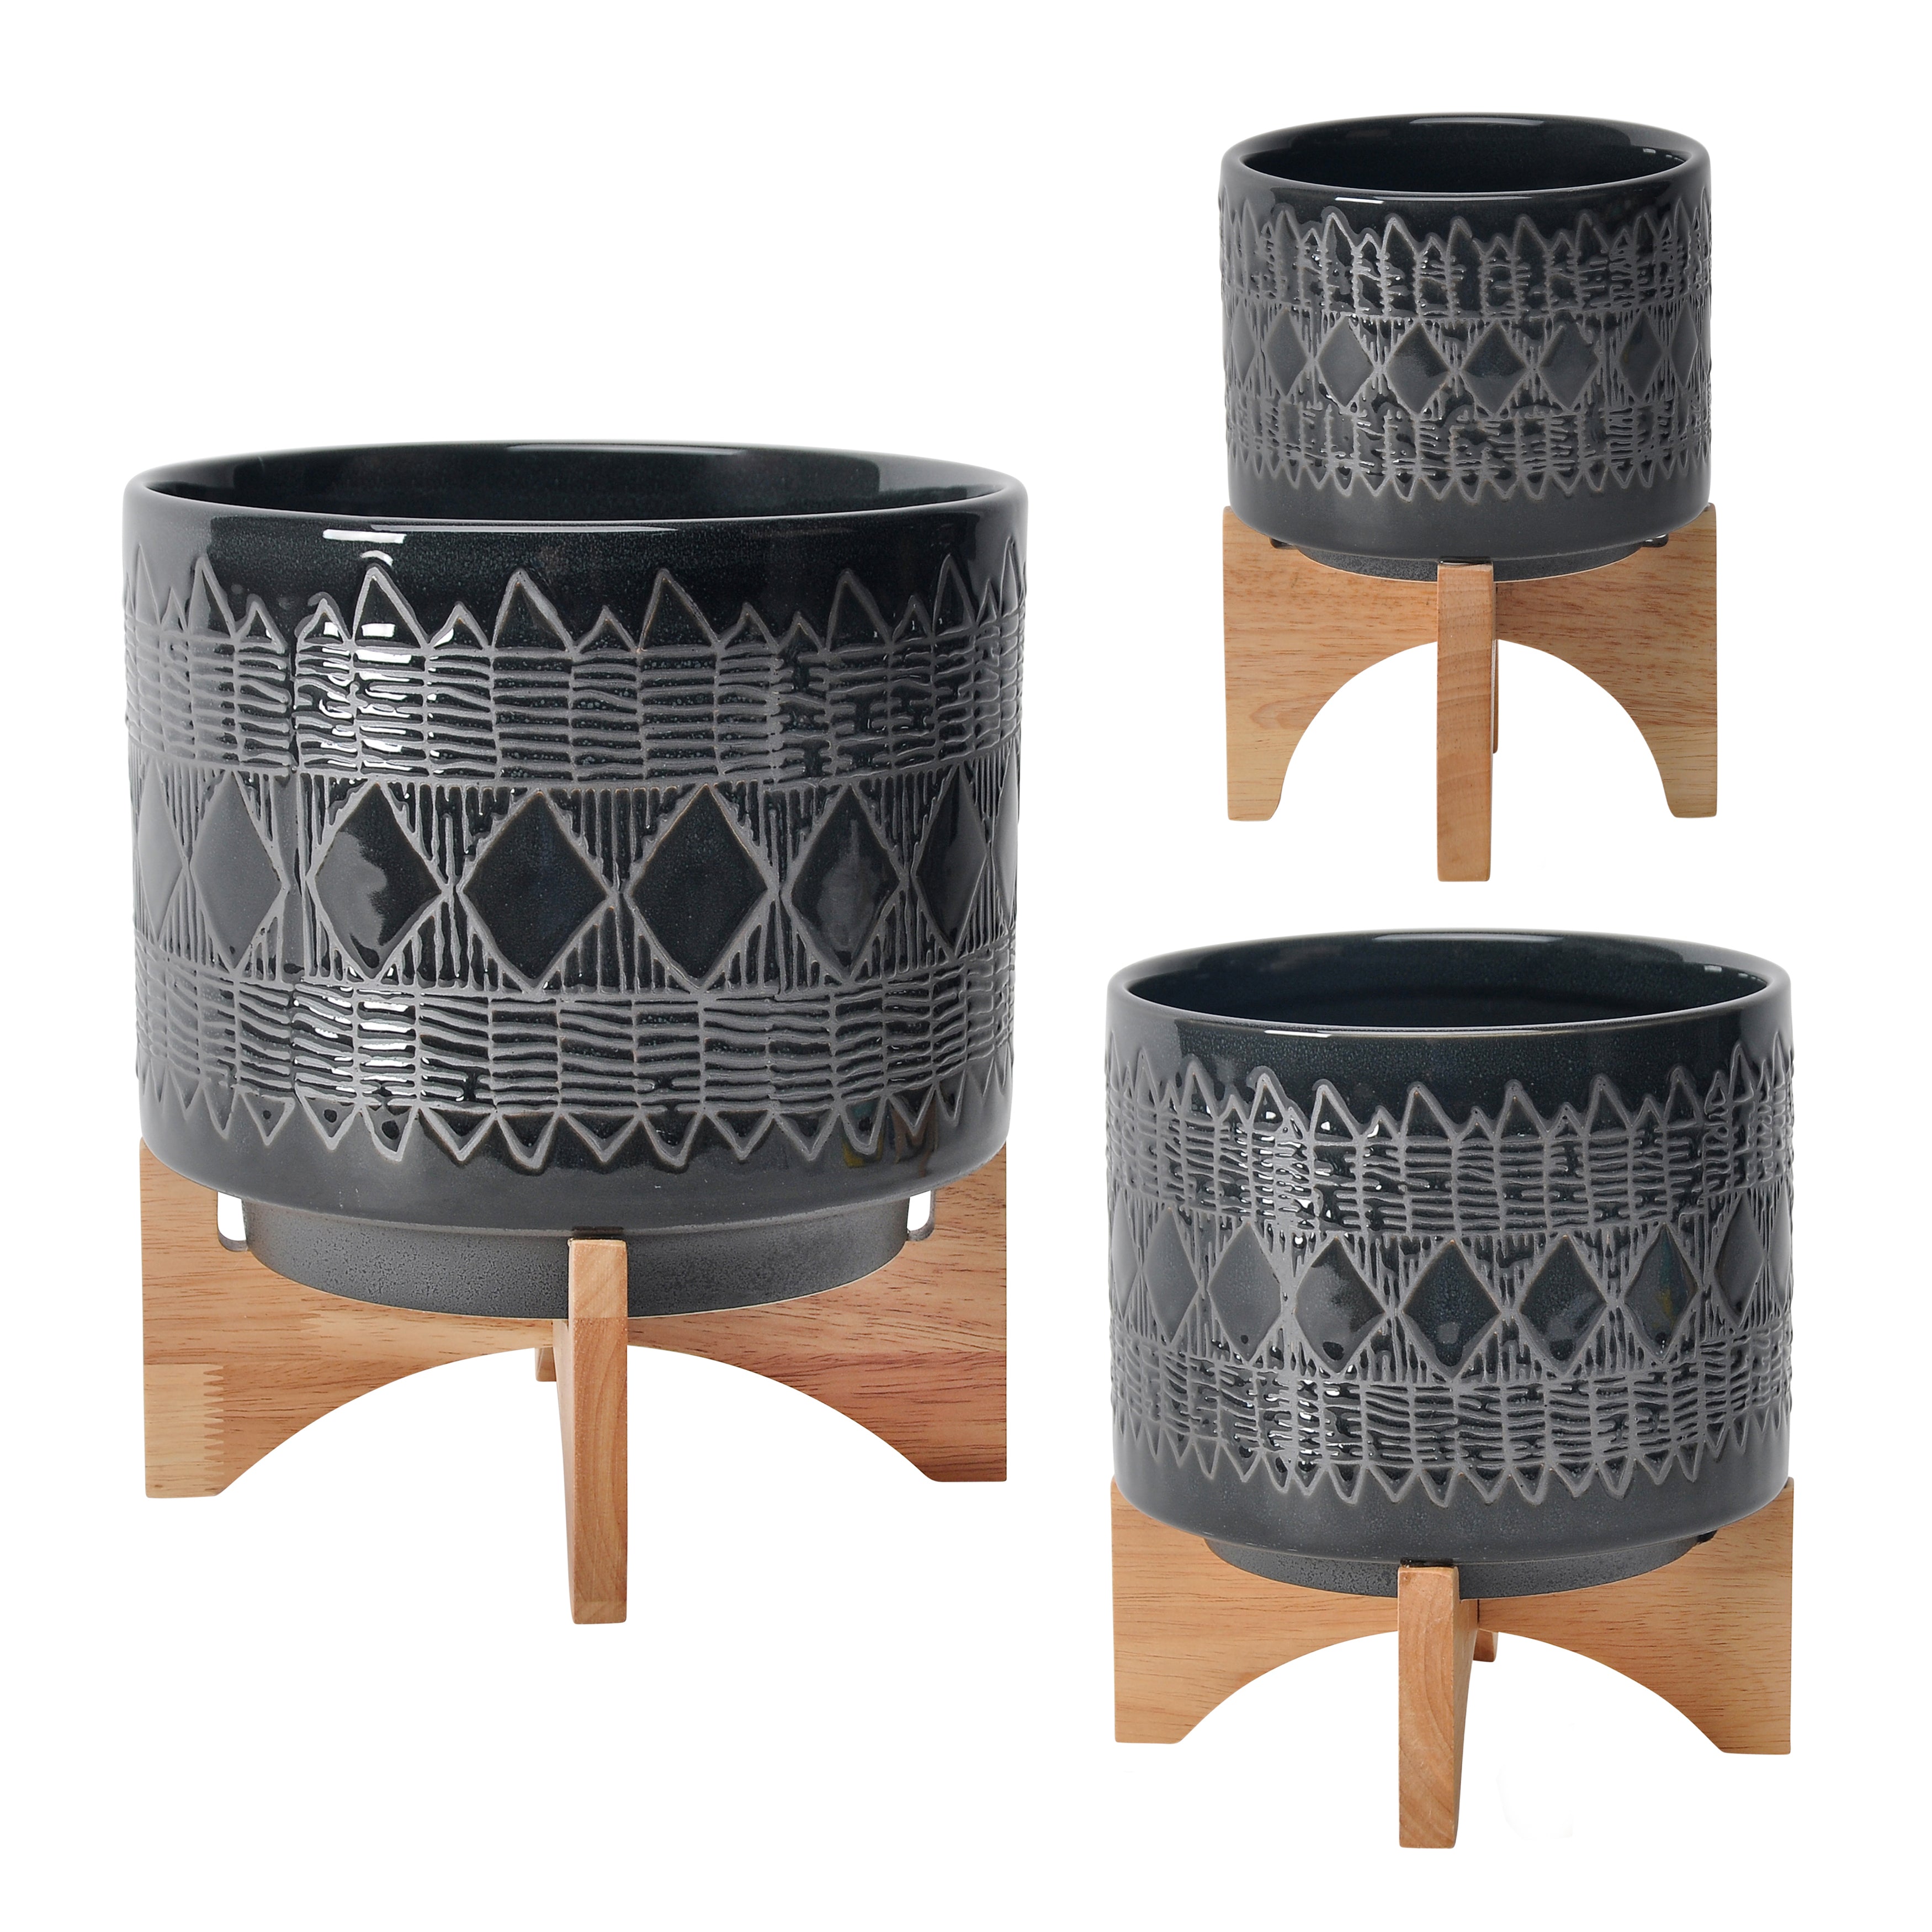 8" Aztec Planter On Wooden Stand, Black, Planters